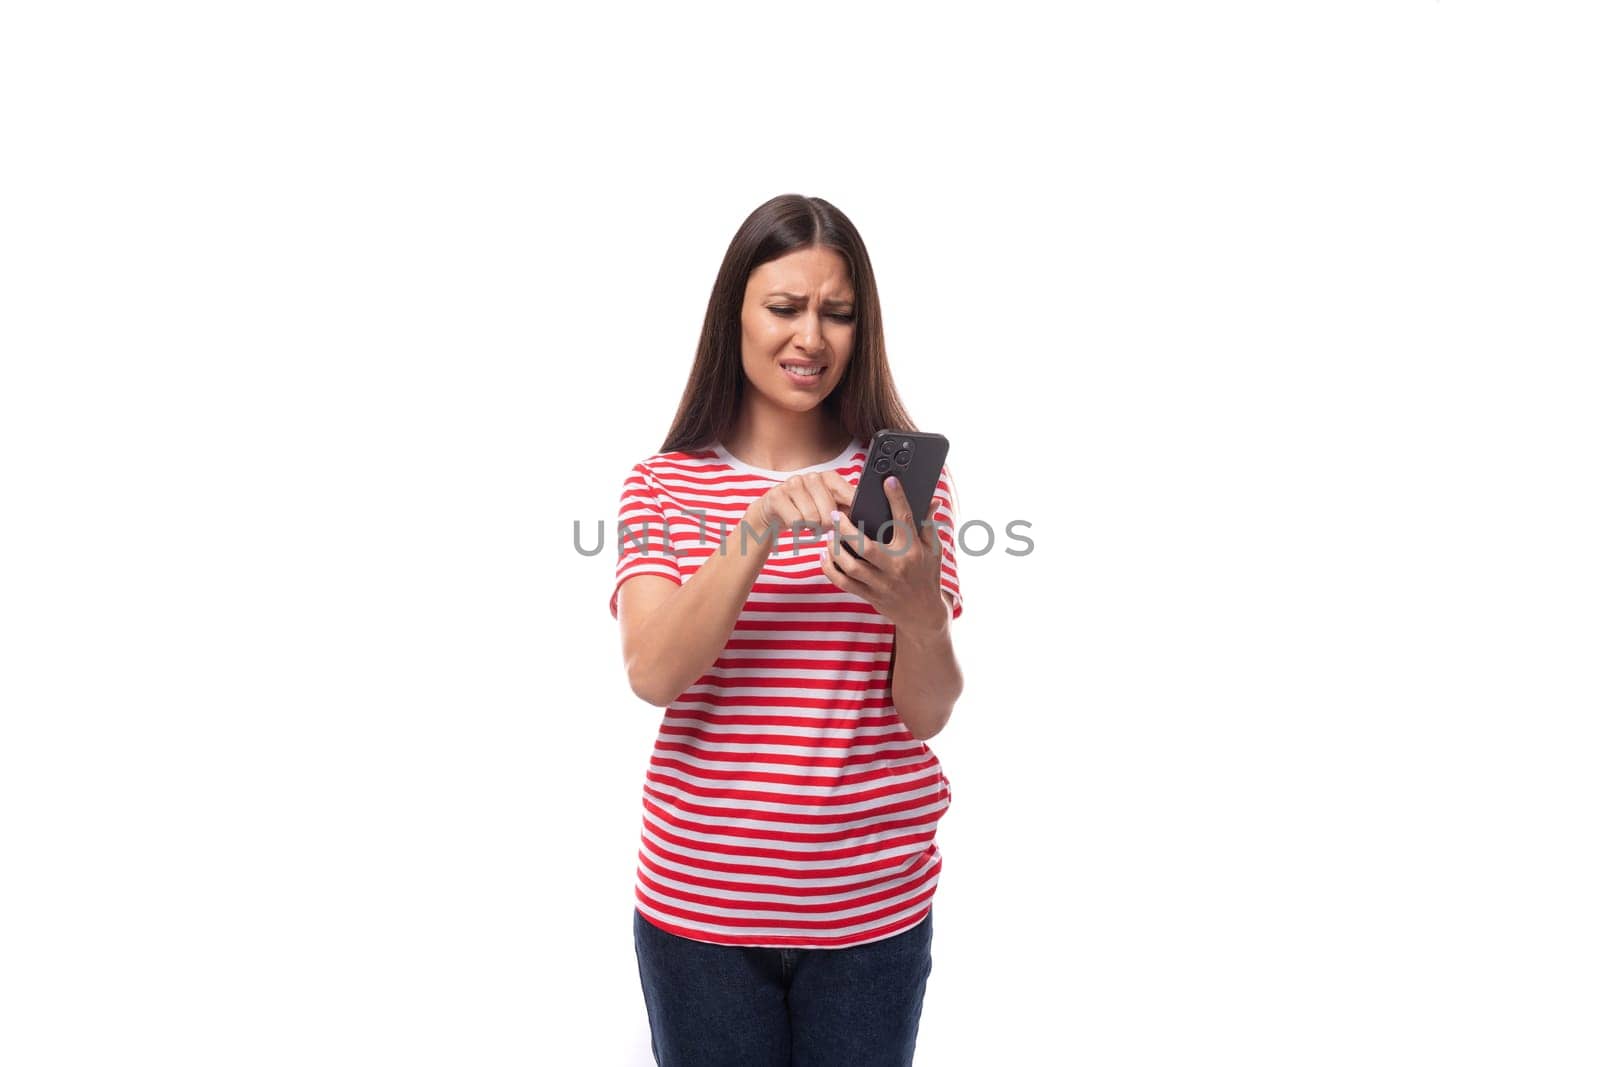 A 35-year-old European lady in a red striped T-shirt uses a mobile phone to communicate in social networks..